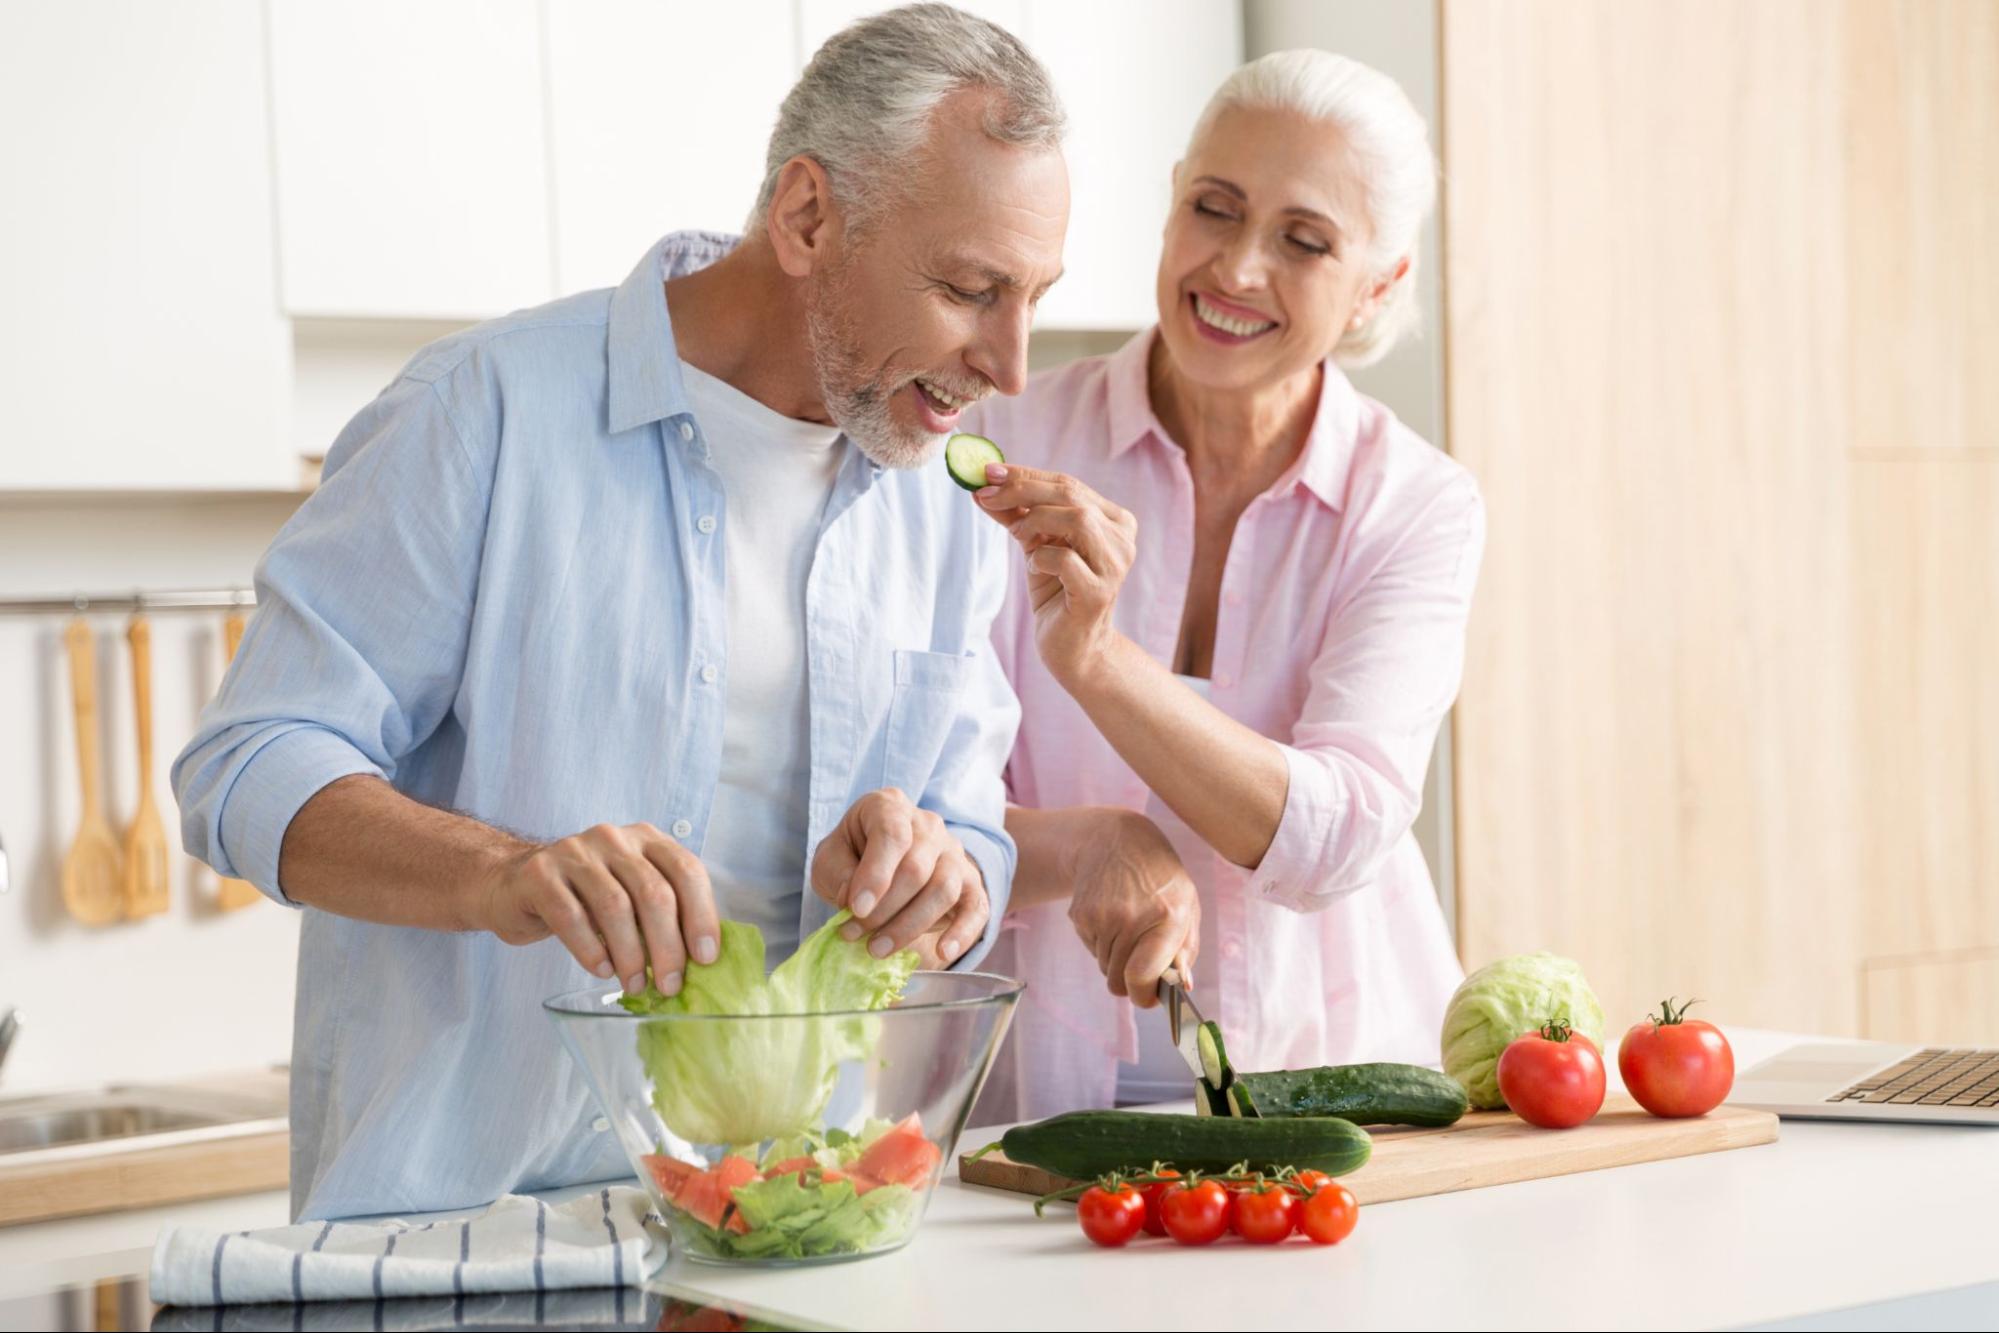 Mature couple having fun in their kitchen making a salad together